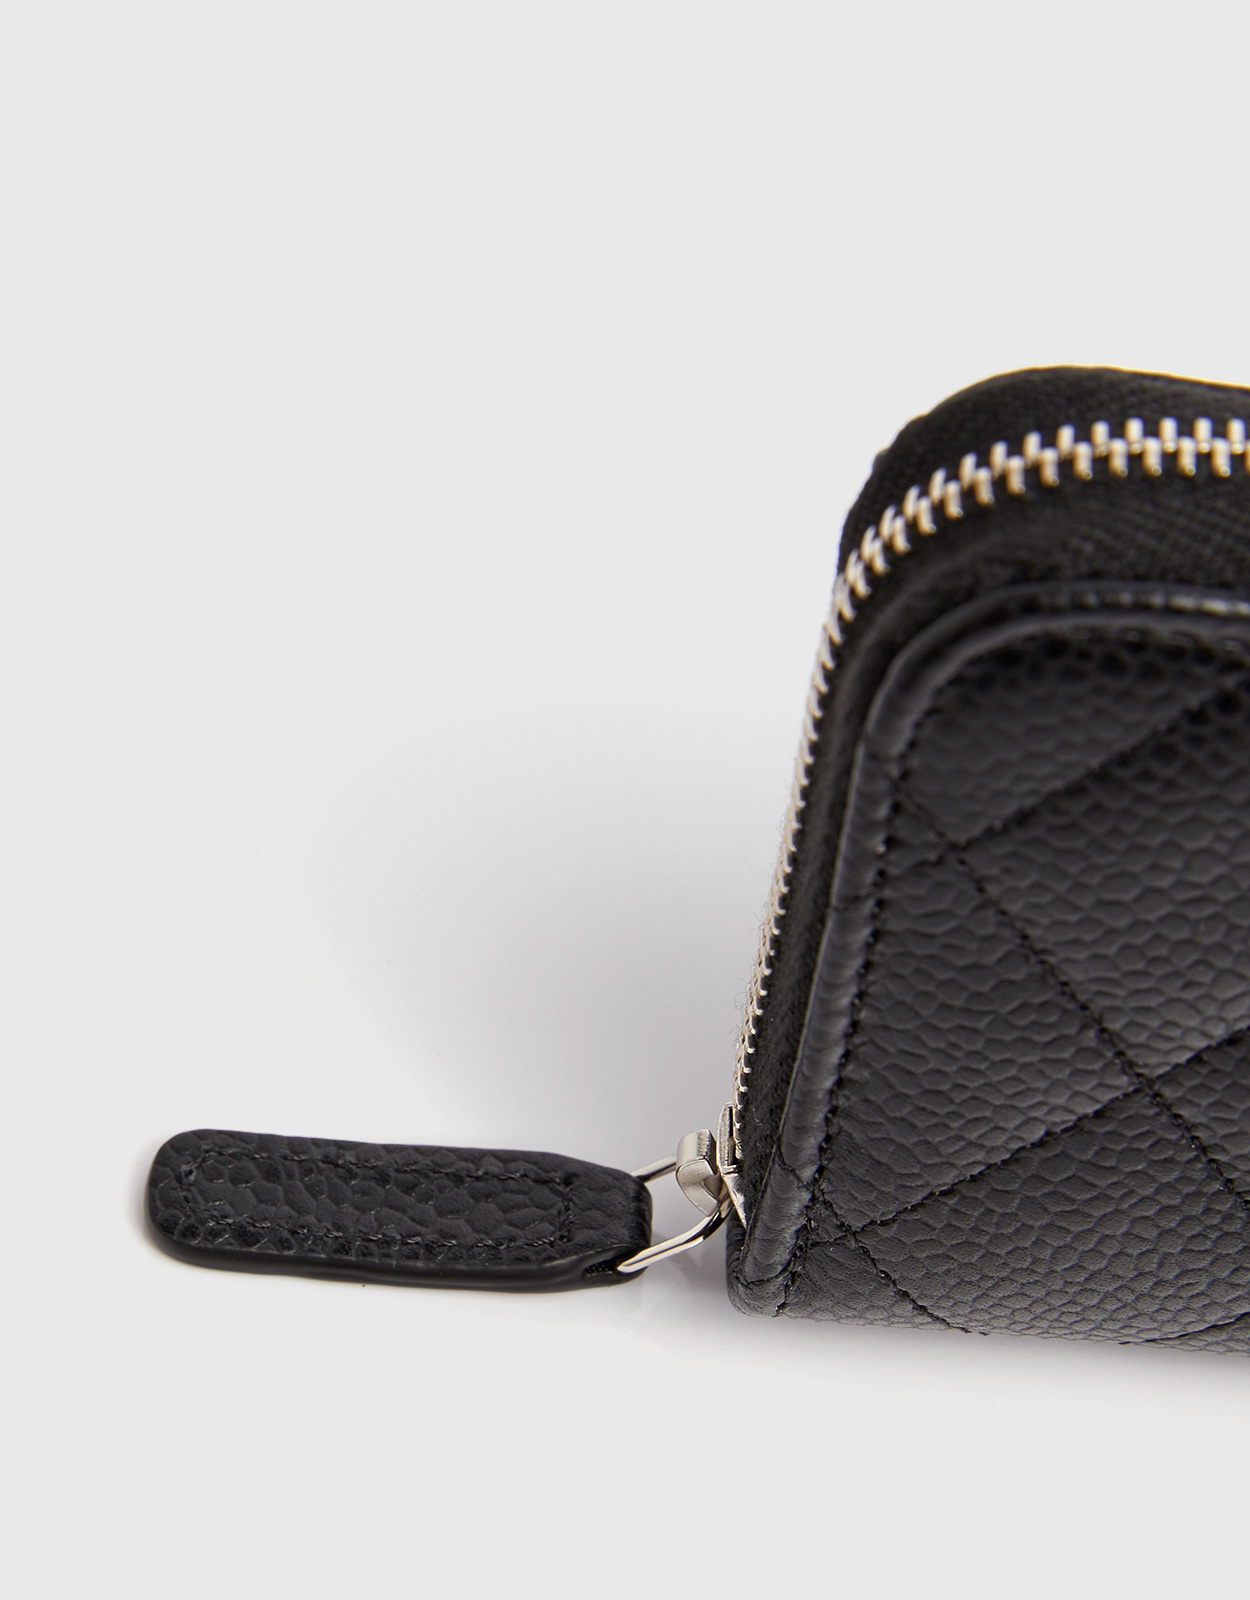 Chanel Classic Grained Calfskin Zipped Coin Purse (Wallets and